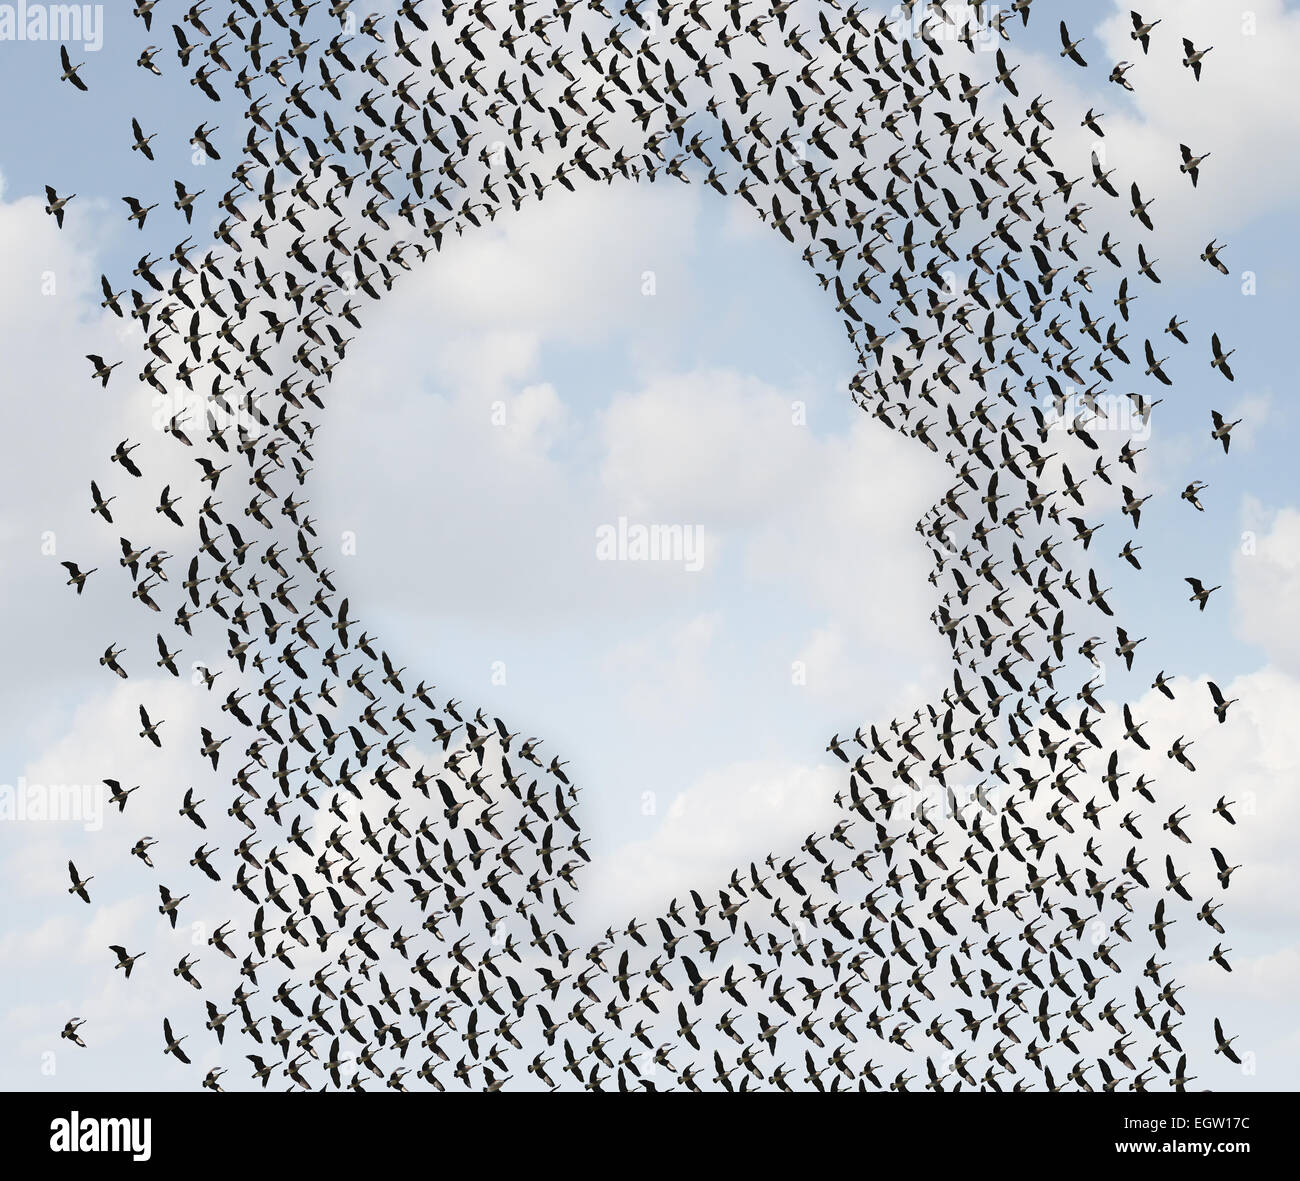 Human freedom and emigration concept as a group of flying geese as an organized flock of birds in the shape of a head or face pr Stock Photo